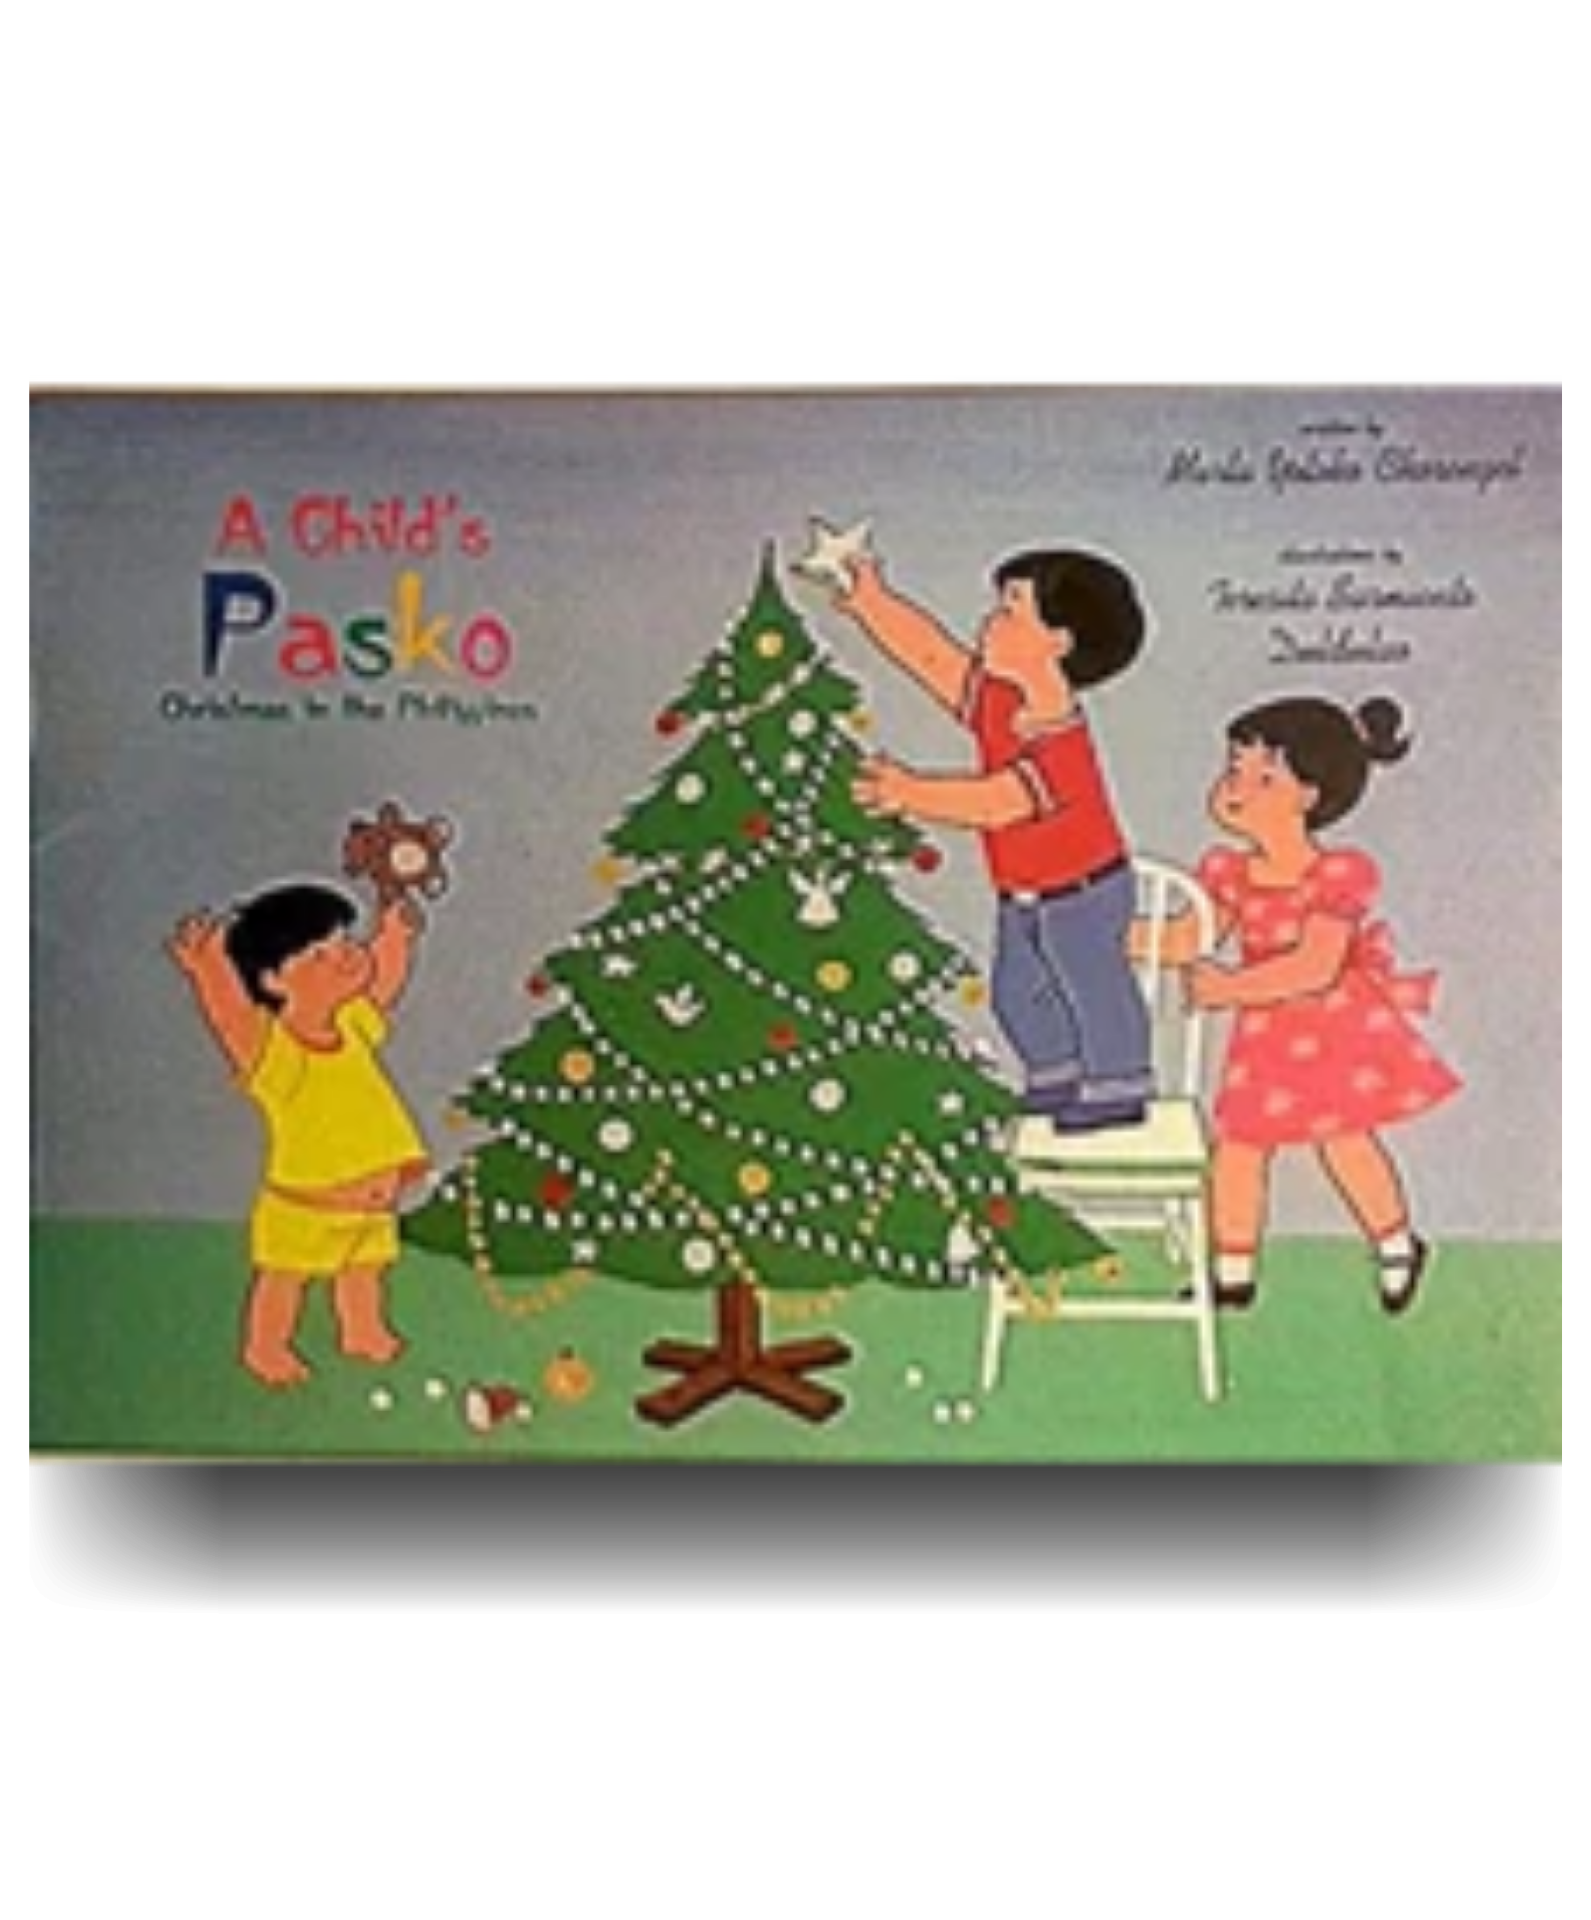 A Child's Pasko. Christmas in the Philippines